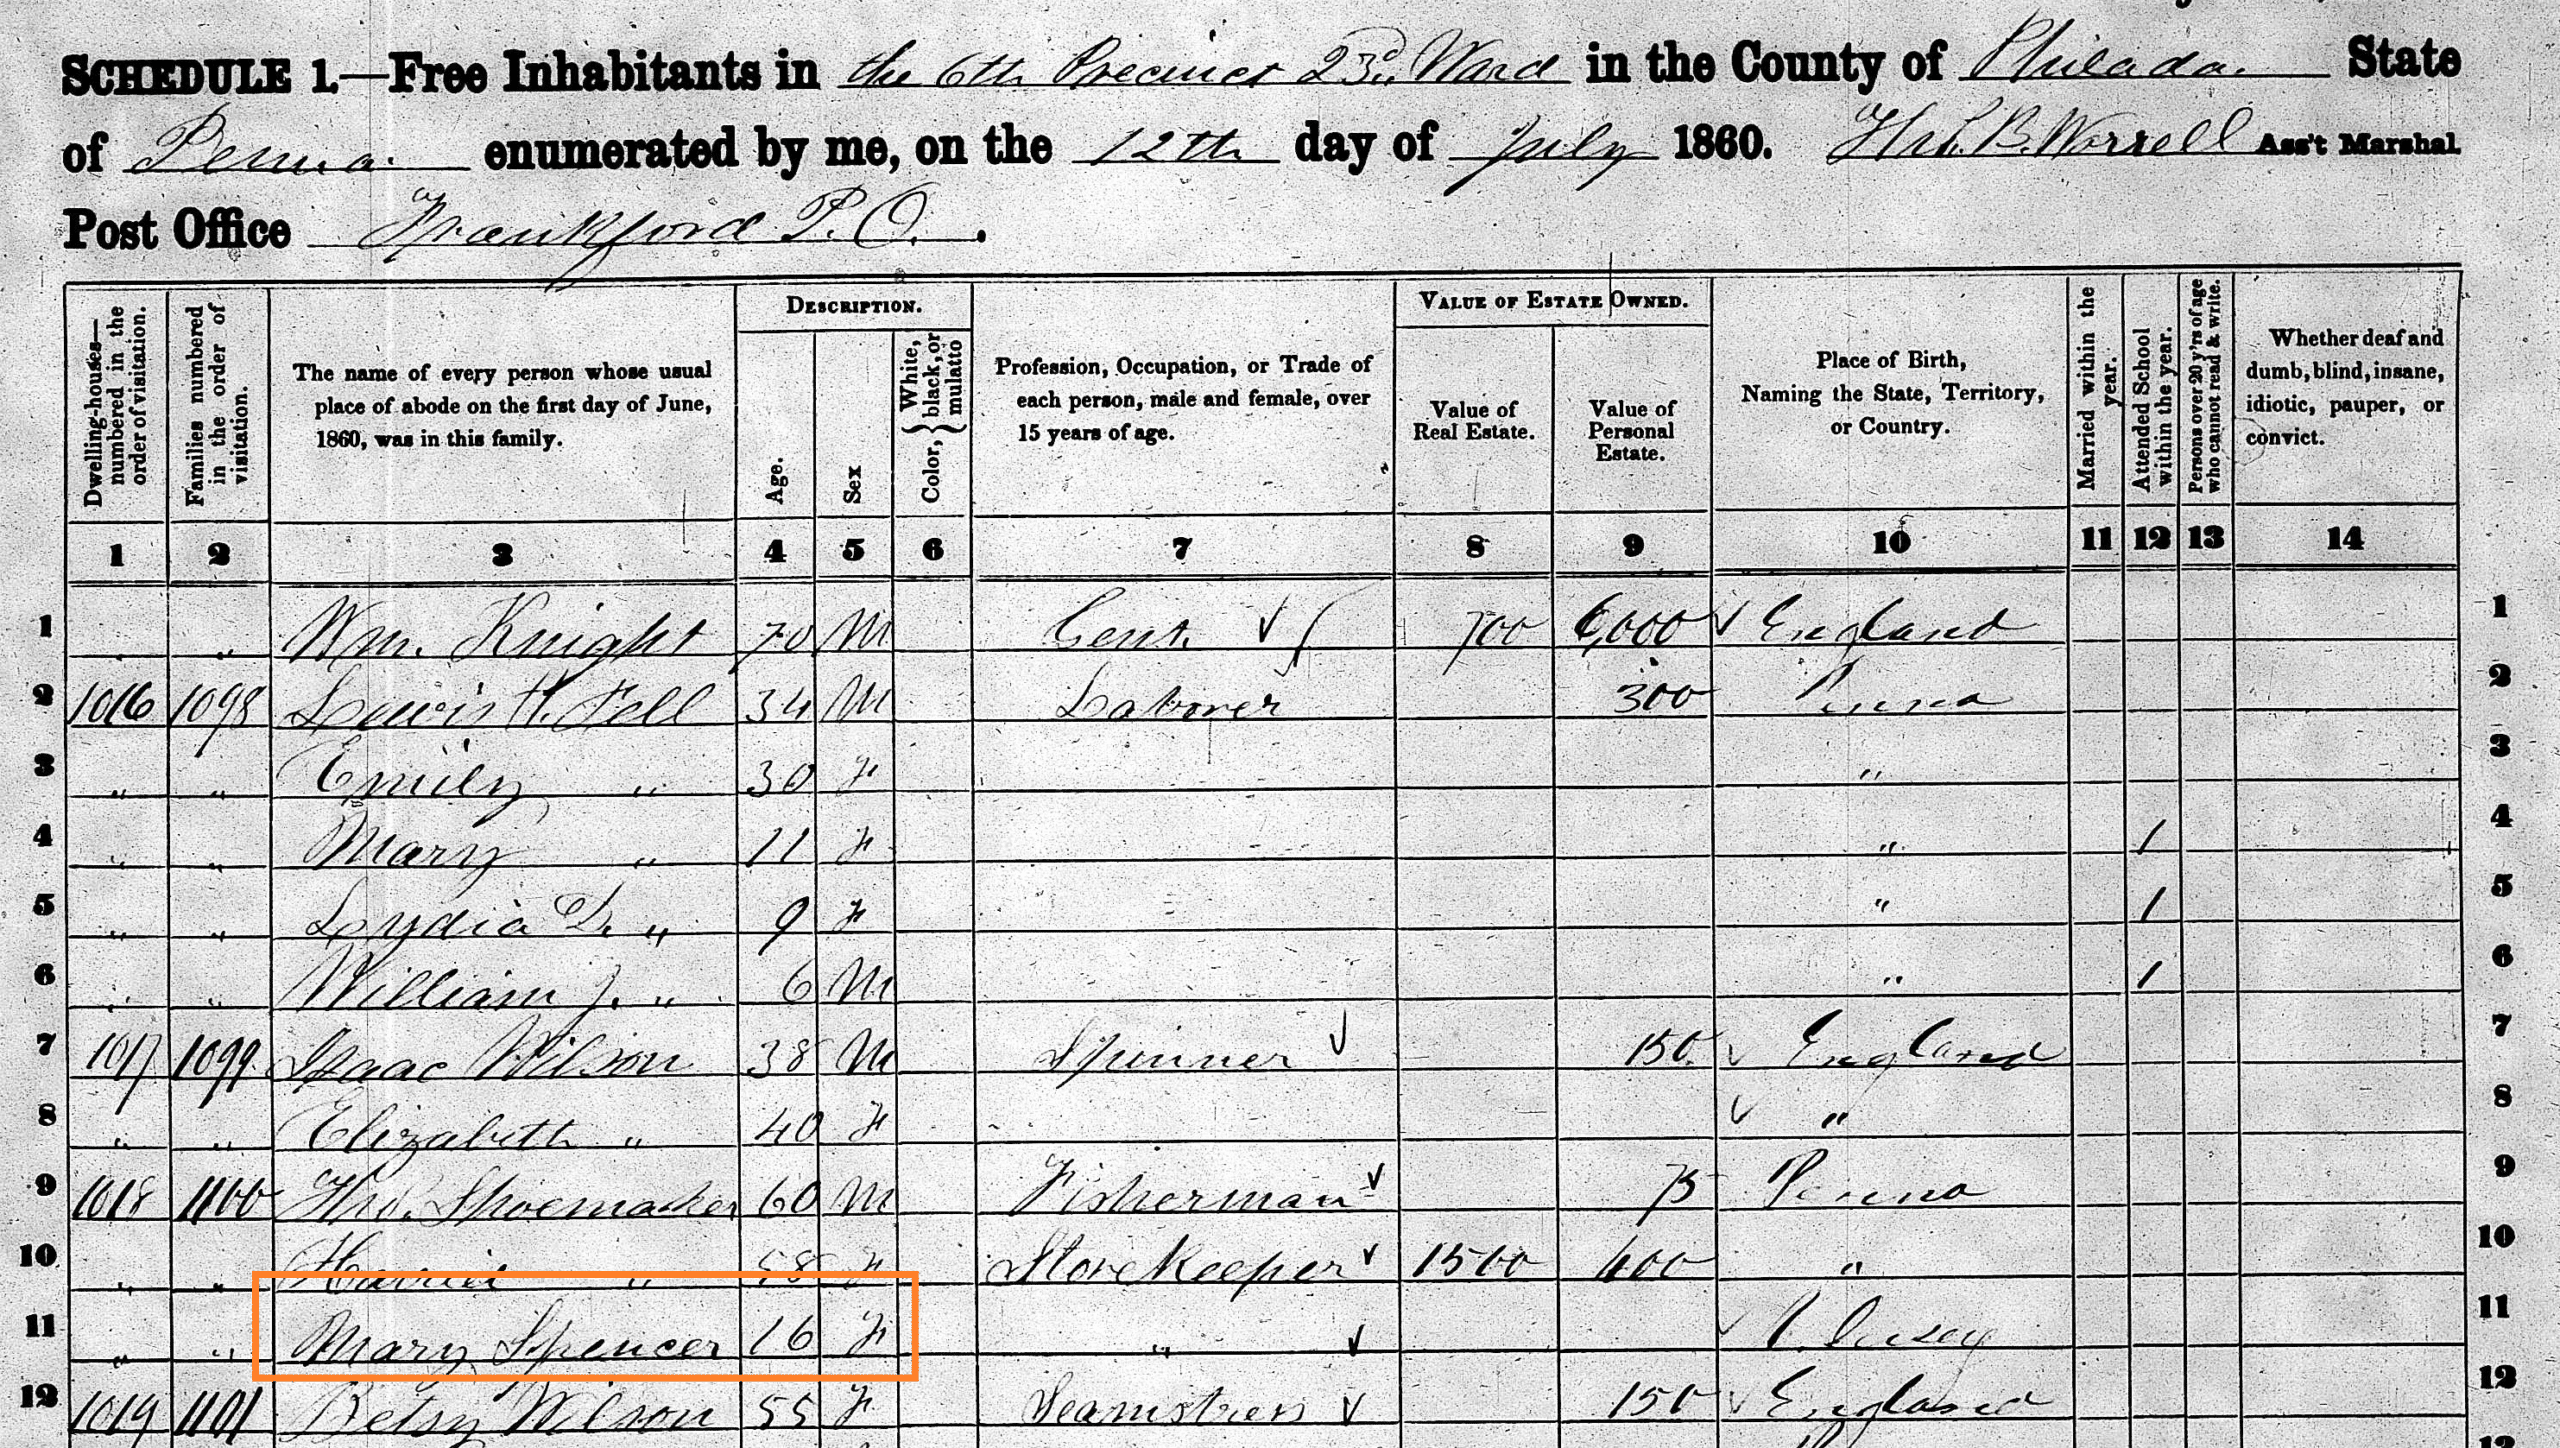 The 1860 U.S. Census record of Mary Elizabeth, listed here at 16 as living with the Shoemaker family in Pennsylvania